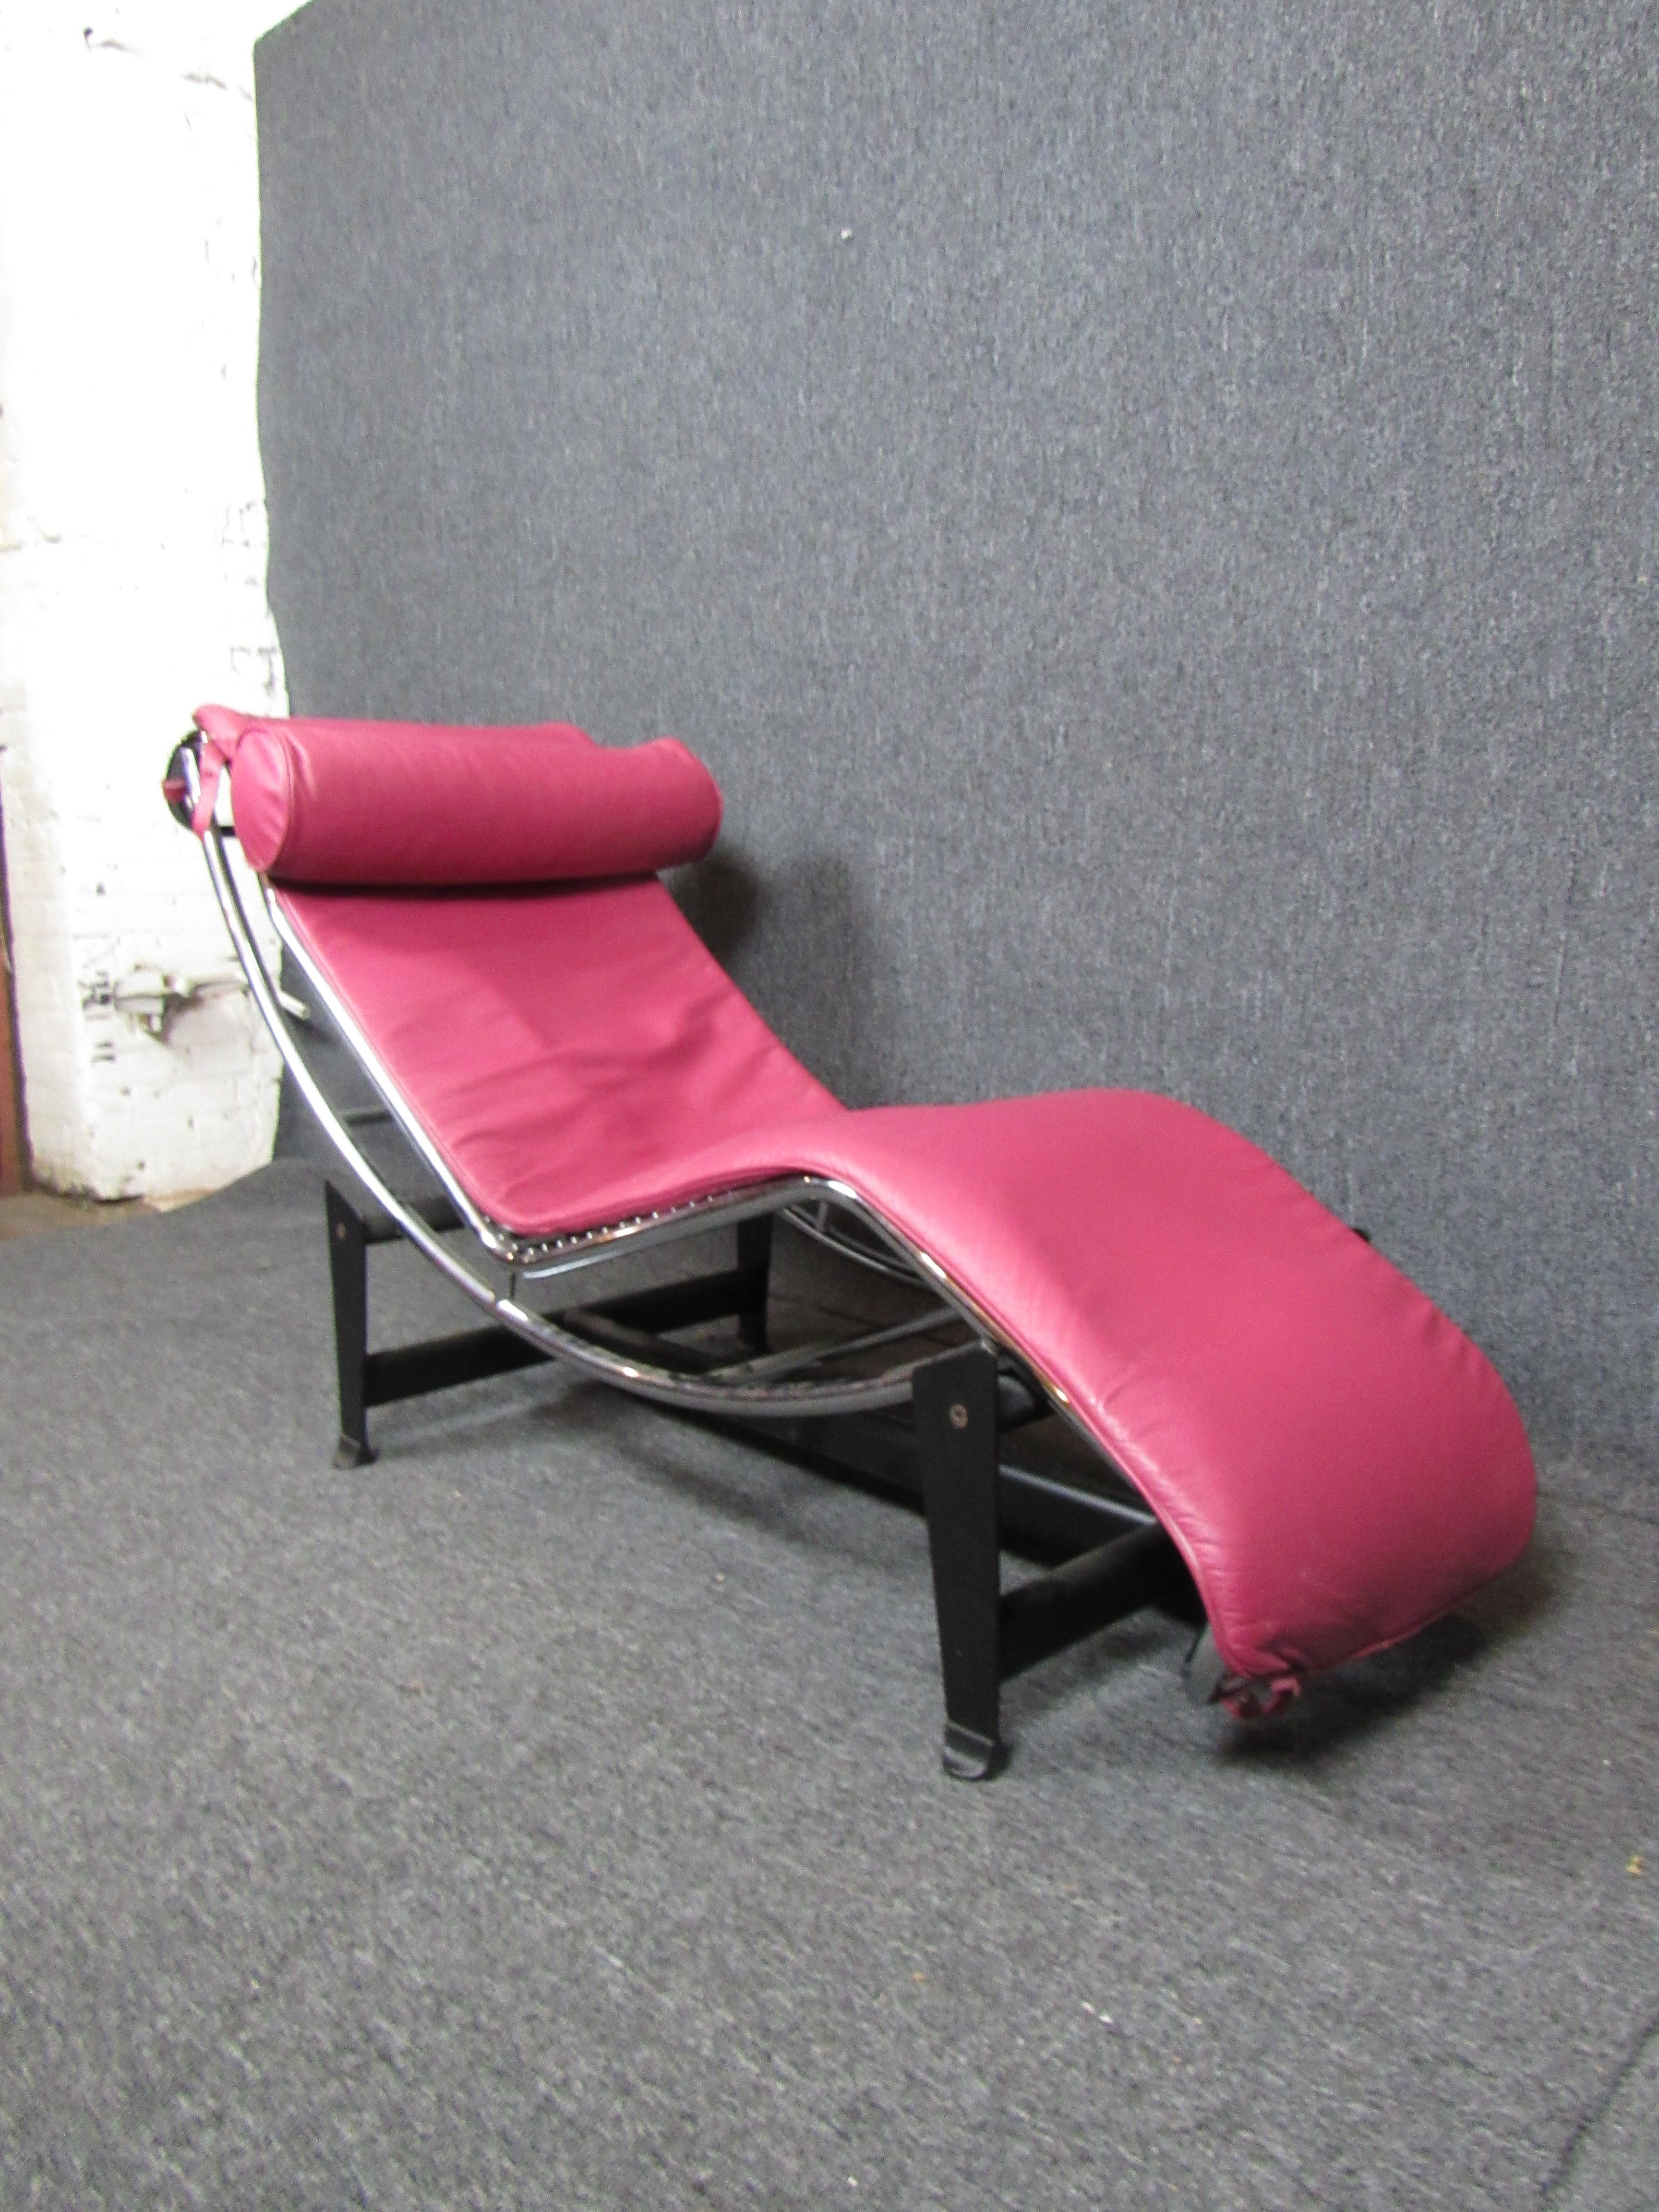 Terrifically funky mid-century chaise lounge. A colorful pink leather cushion with an attached pillow sits atop heavy duty webbing and chrome tubing for a comfortable and supportive lounge. Adjustable base allows you to fully recline. 

Please